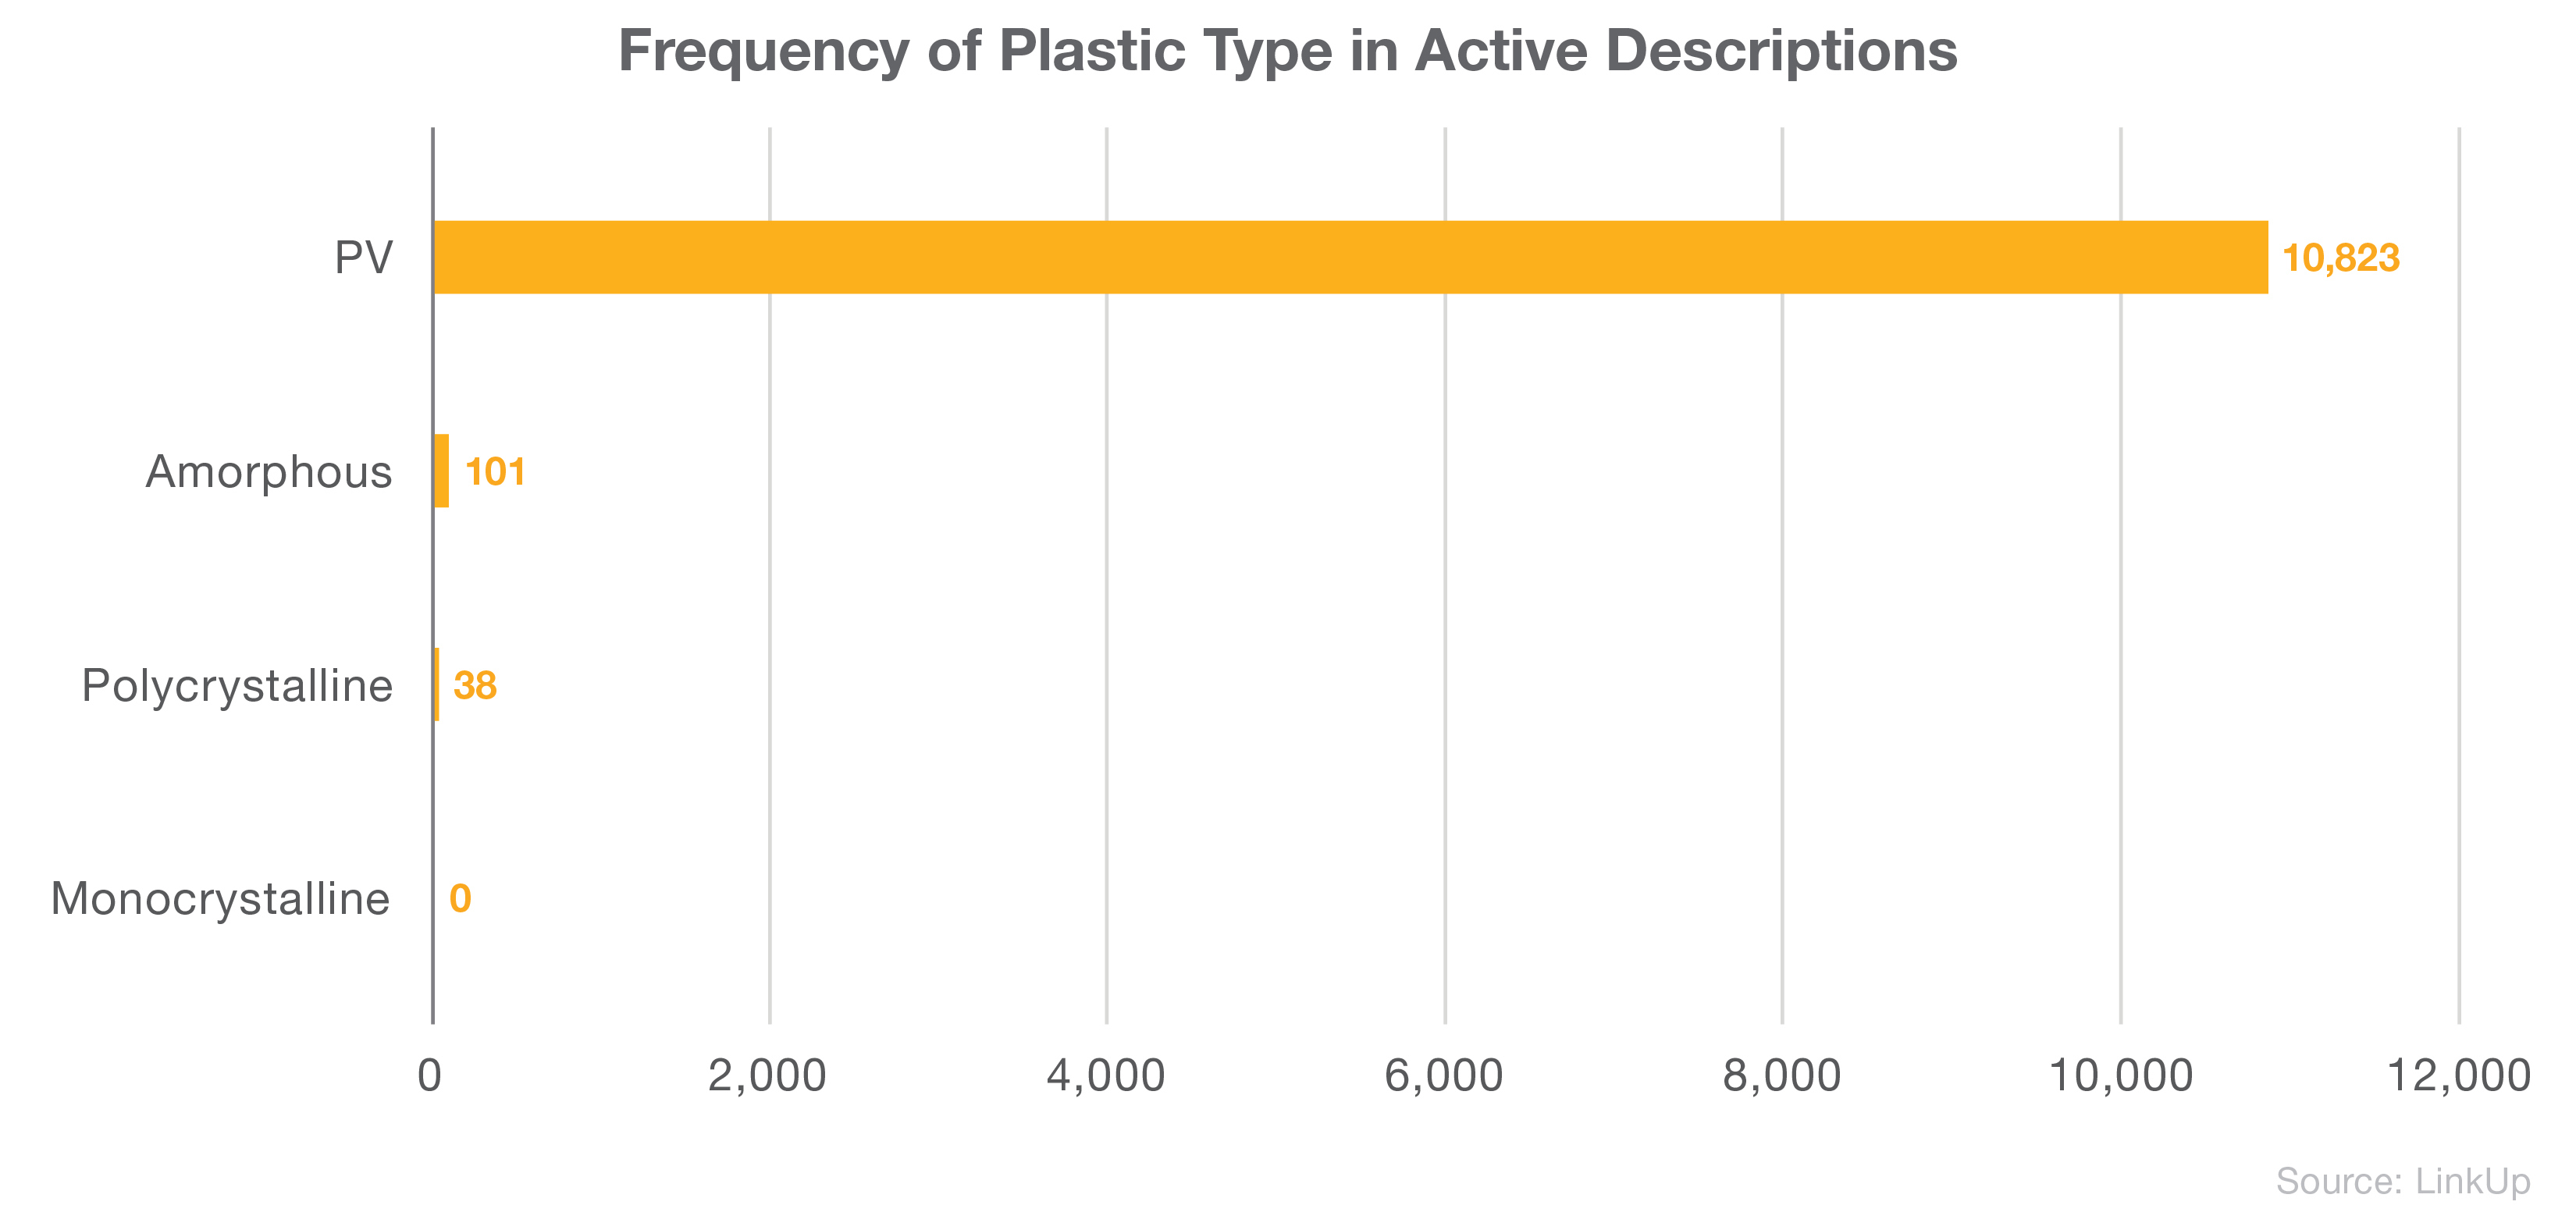 Frequency of Plastic Type in Active Descriptions